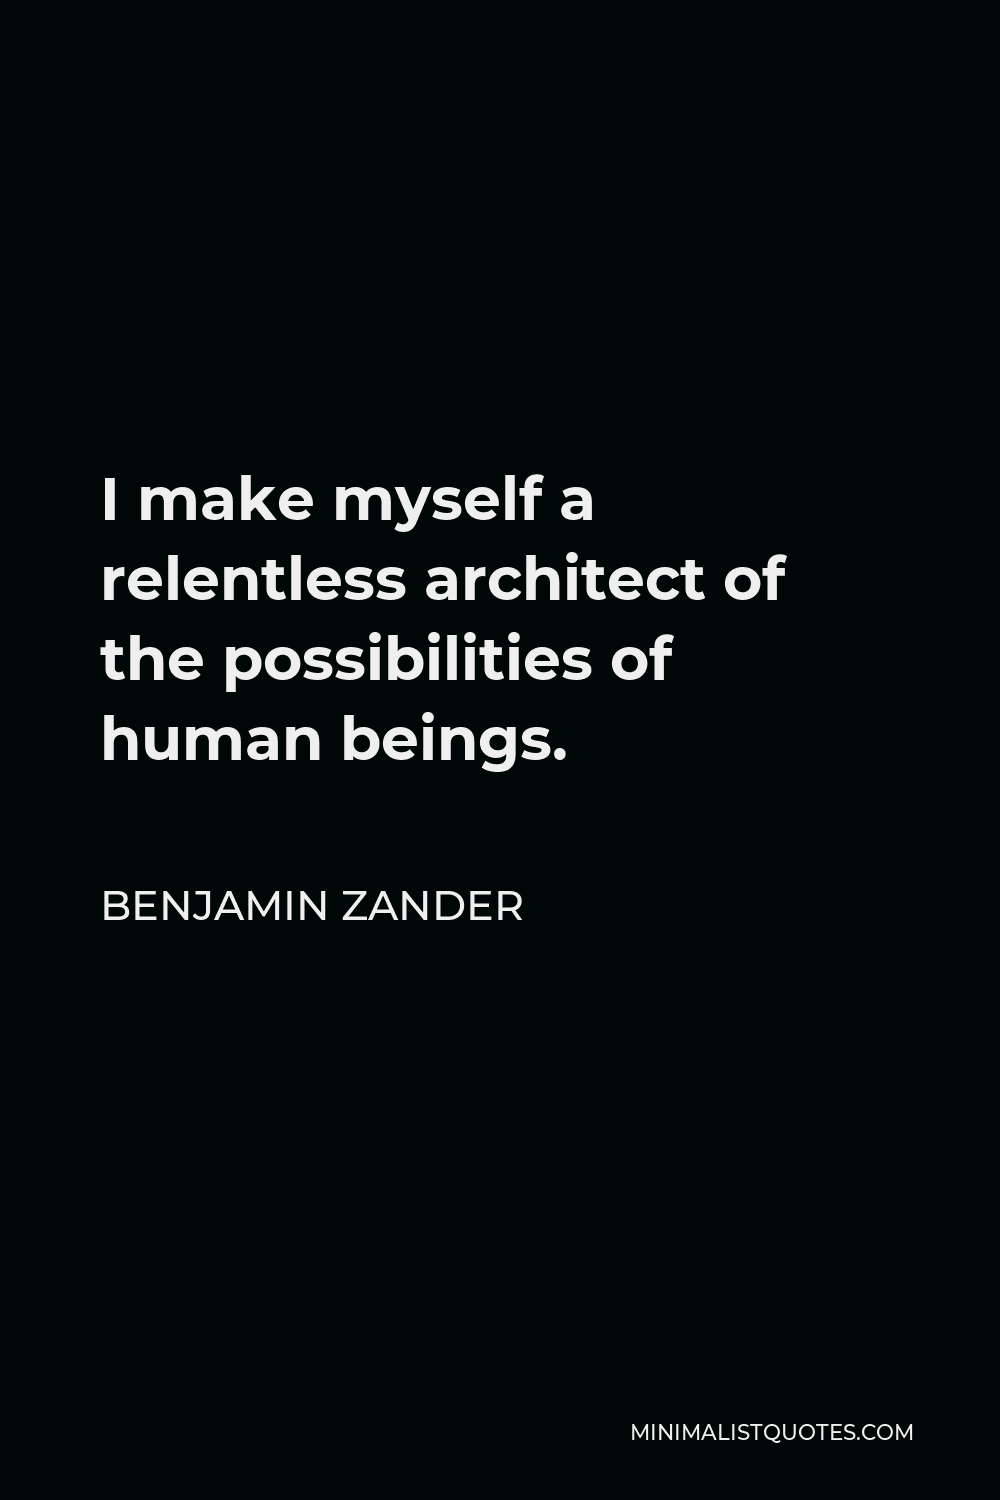 Benjamin Zander Quote - I make myself a relentless architect of the possibilities of human beings.